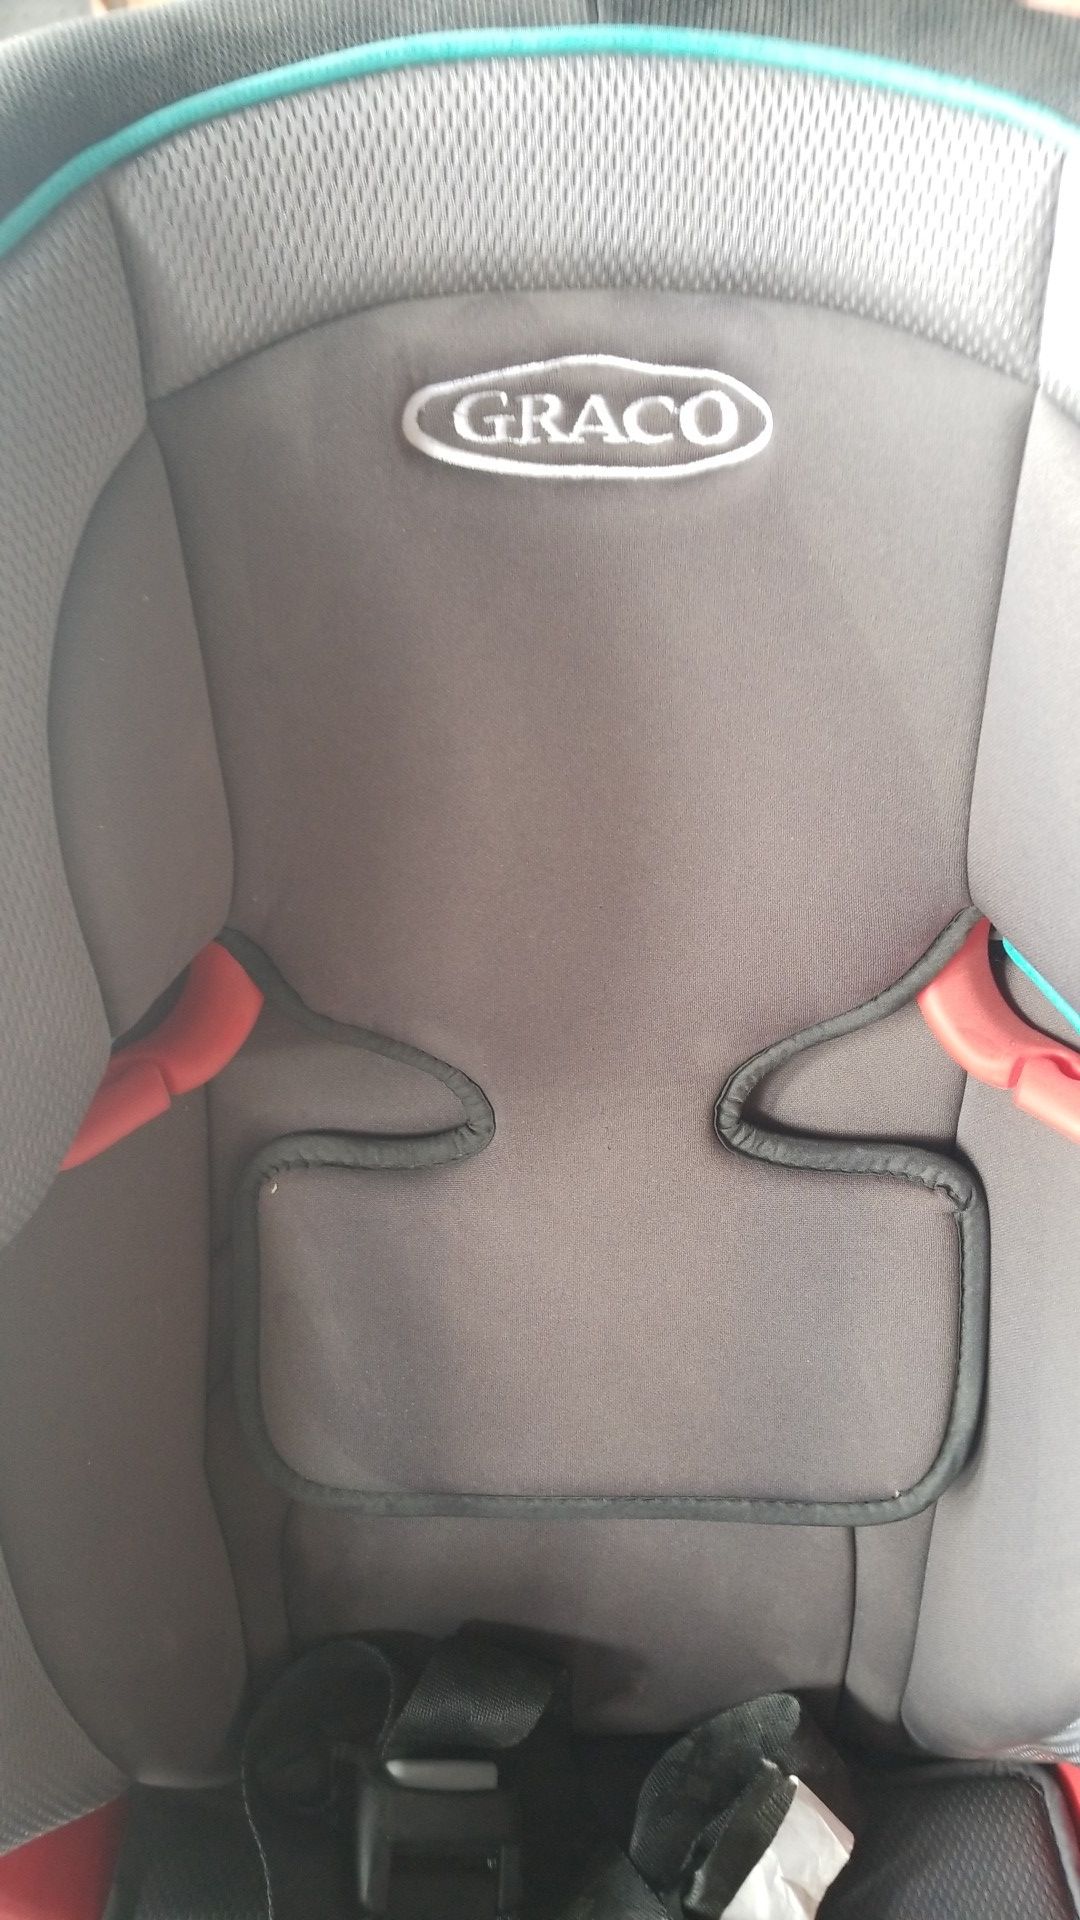 Graco car seat very good condition.